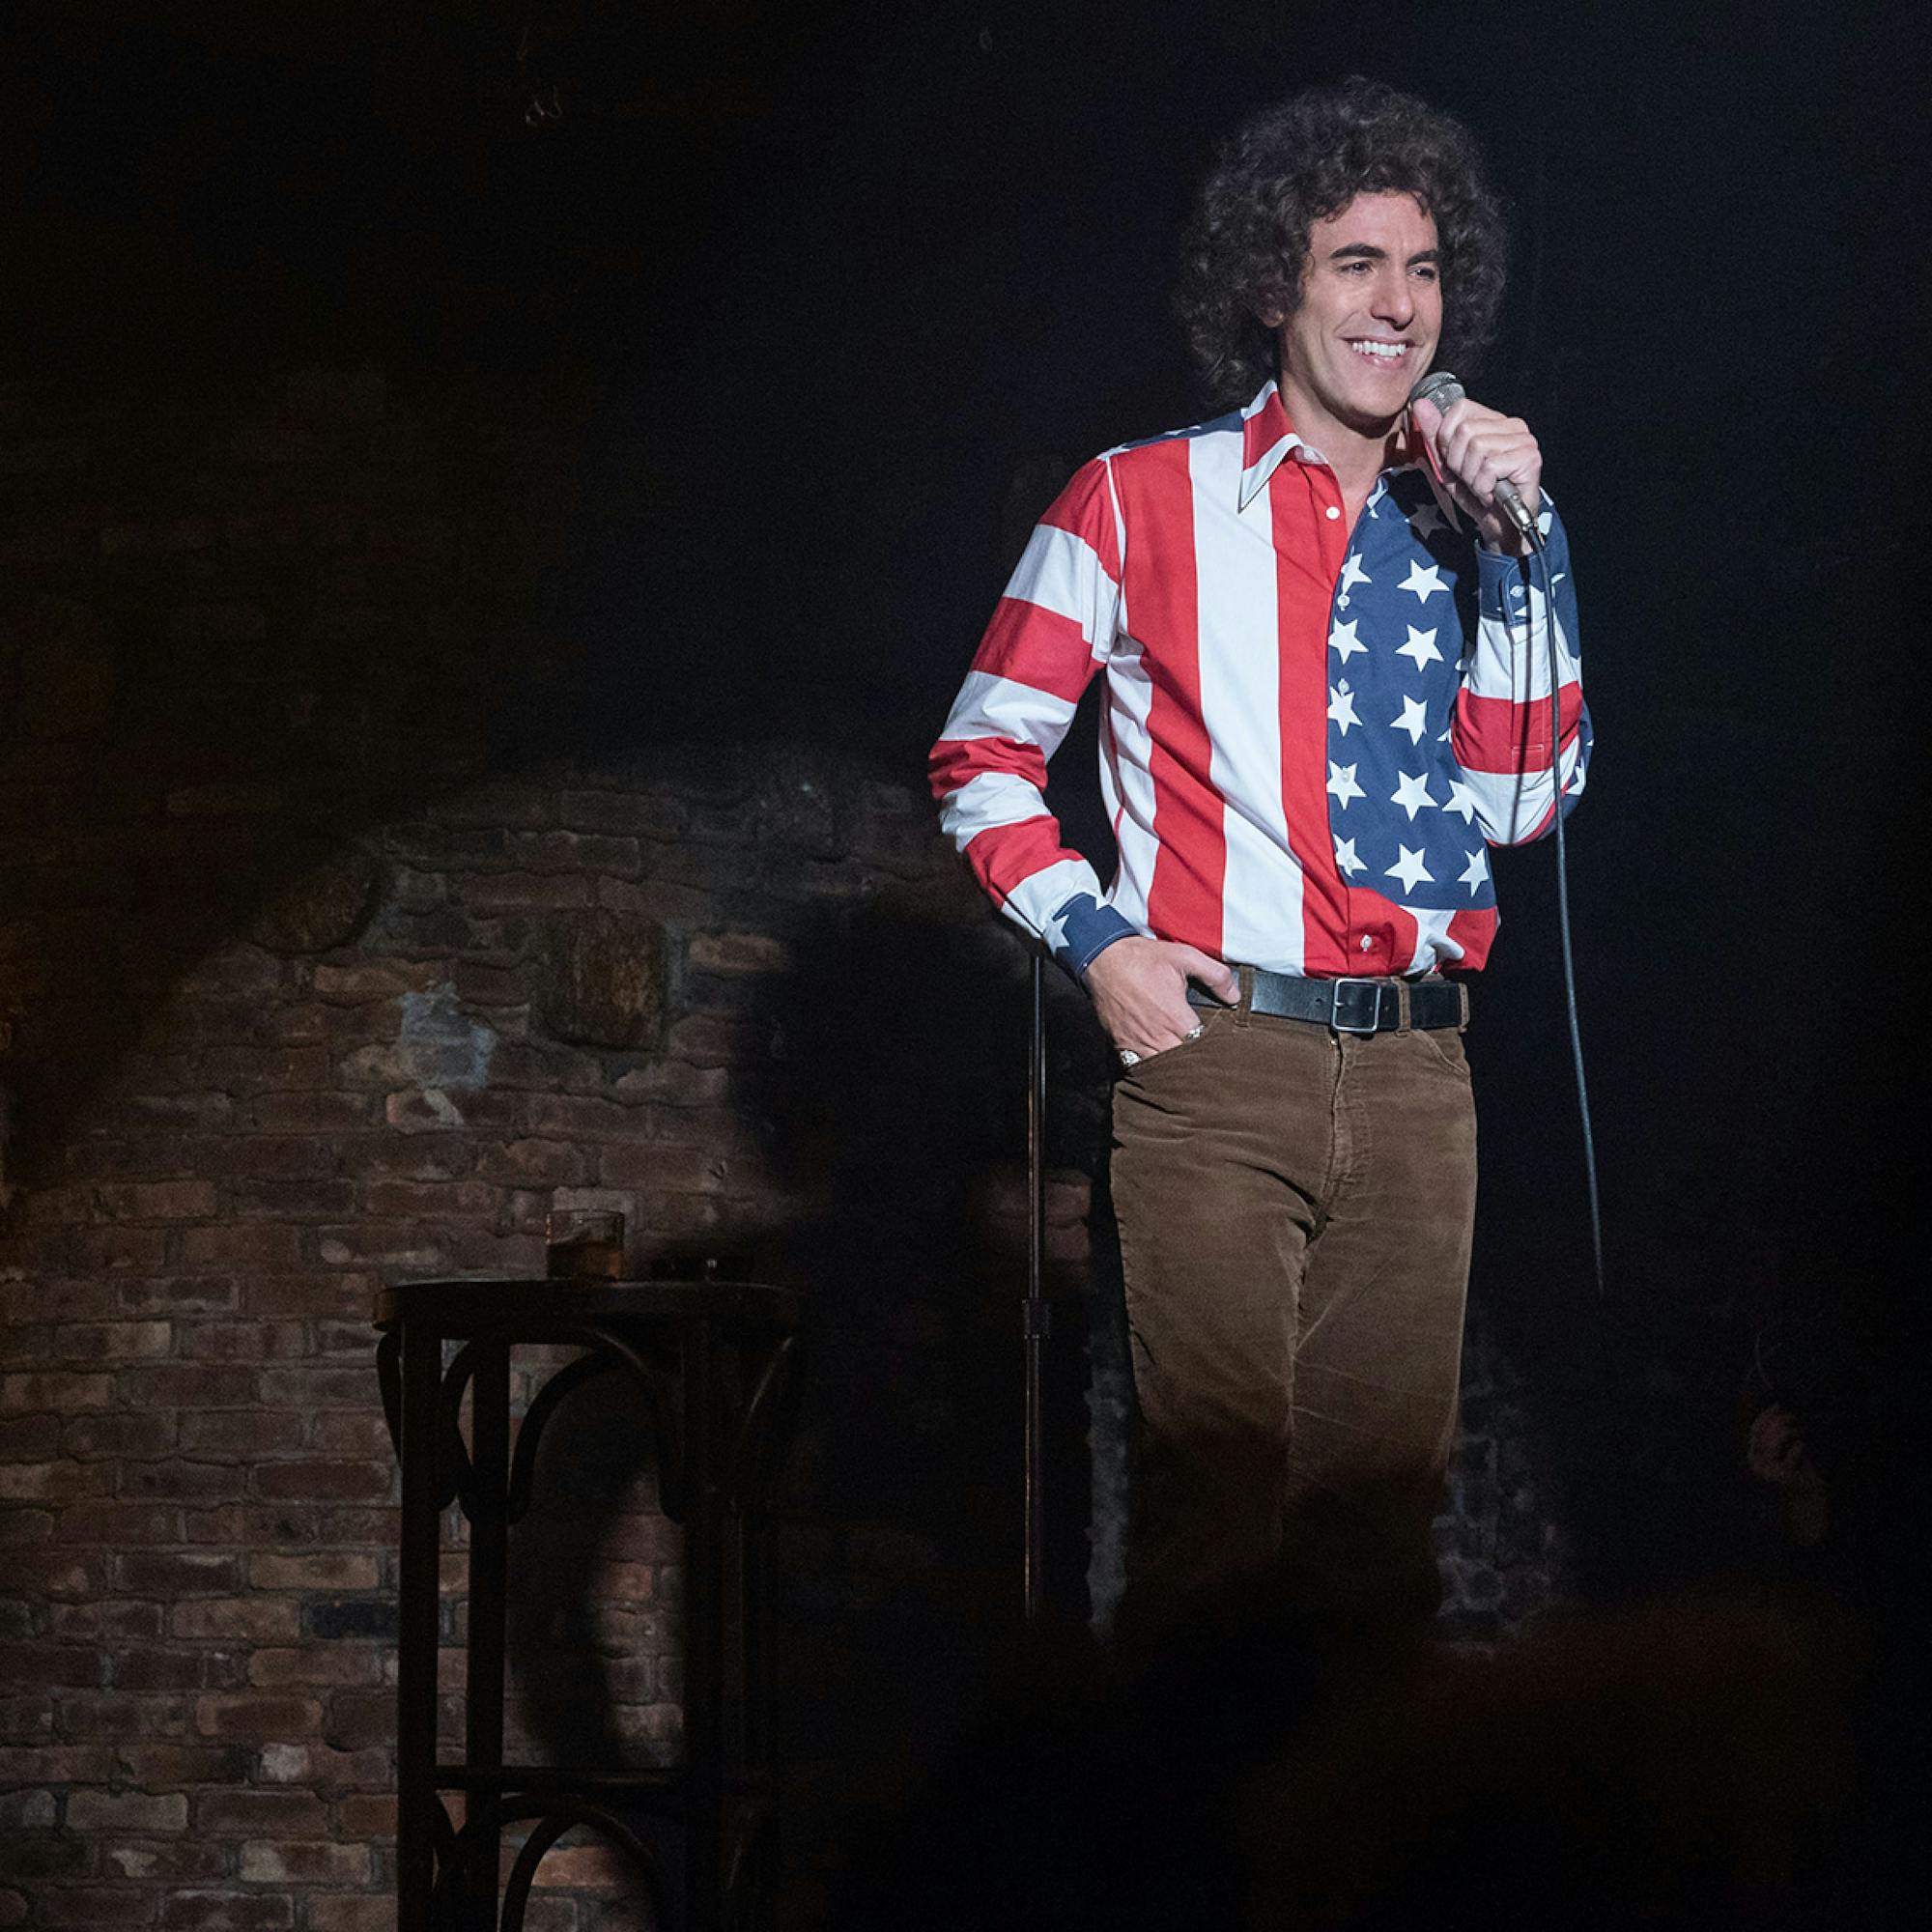 Cohen wears an American flag shirt and brown cords, and stands behind a microphone. His hand is in his pocket, and he is laughing. There is a single spotlight lighting him up but everything else is in the shot is dark. 